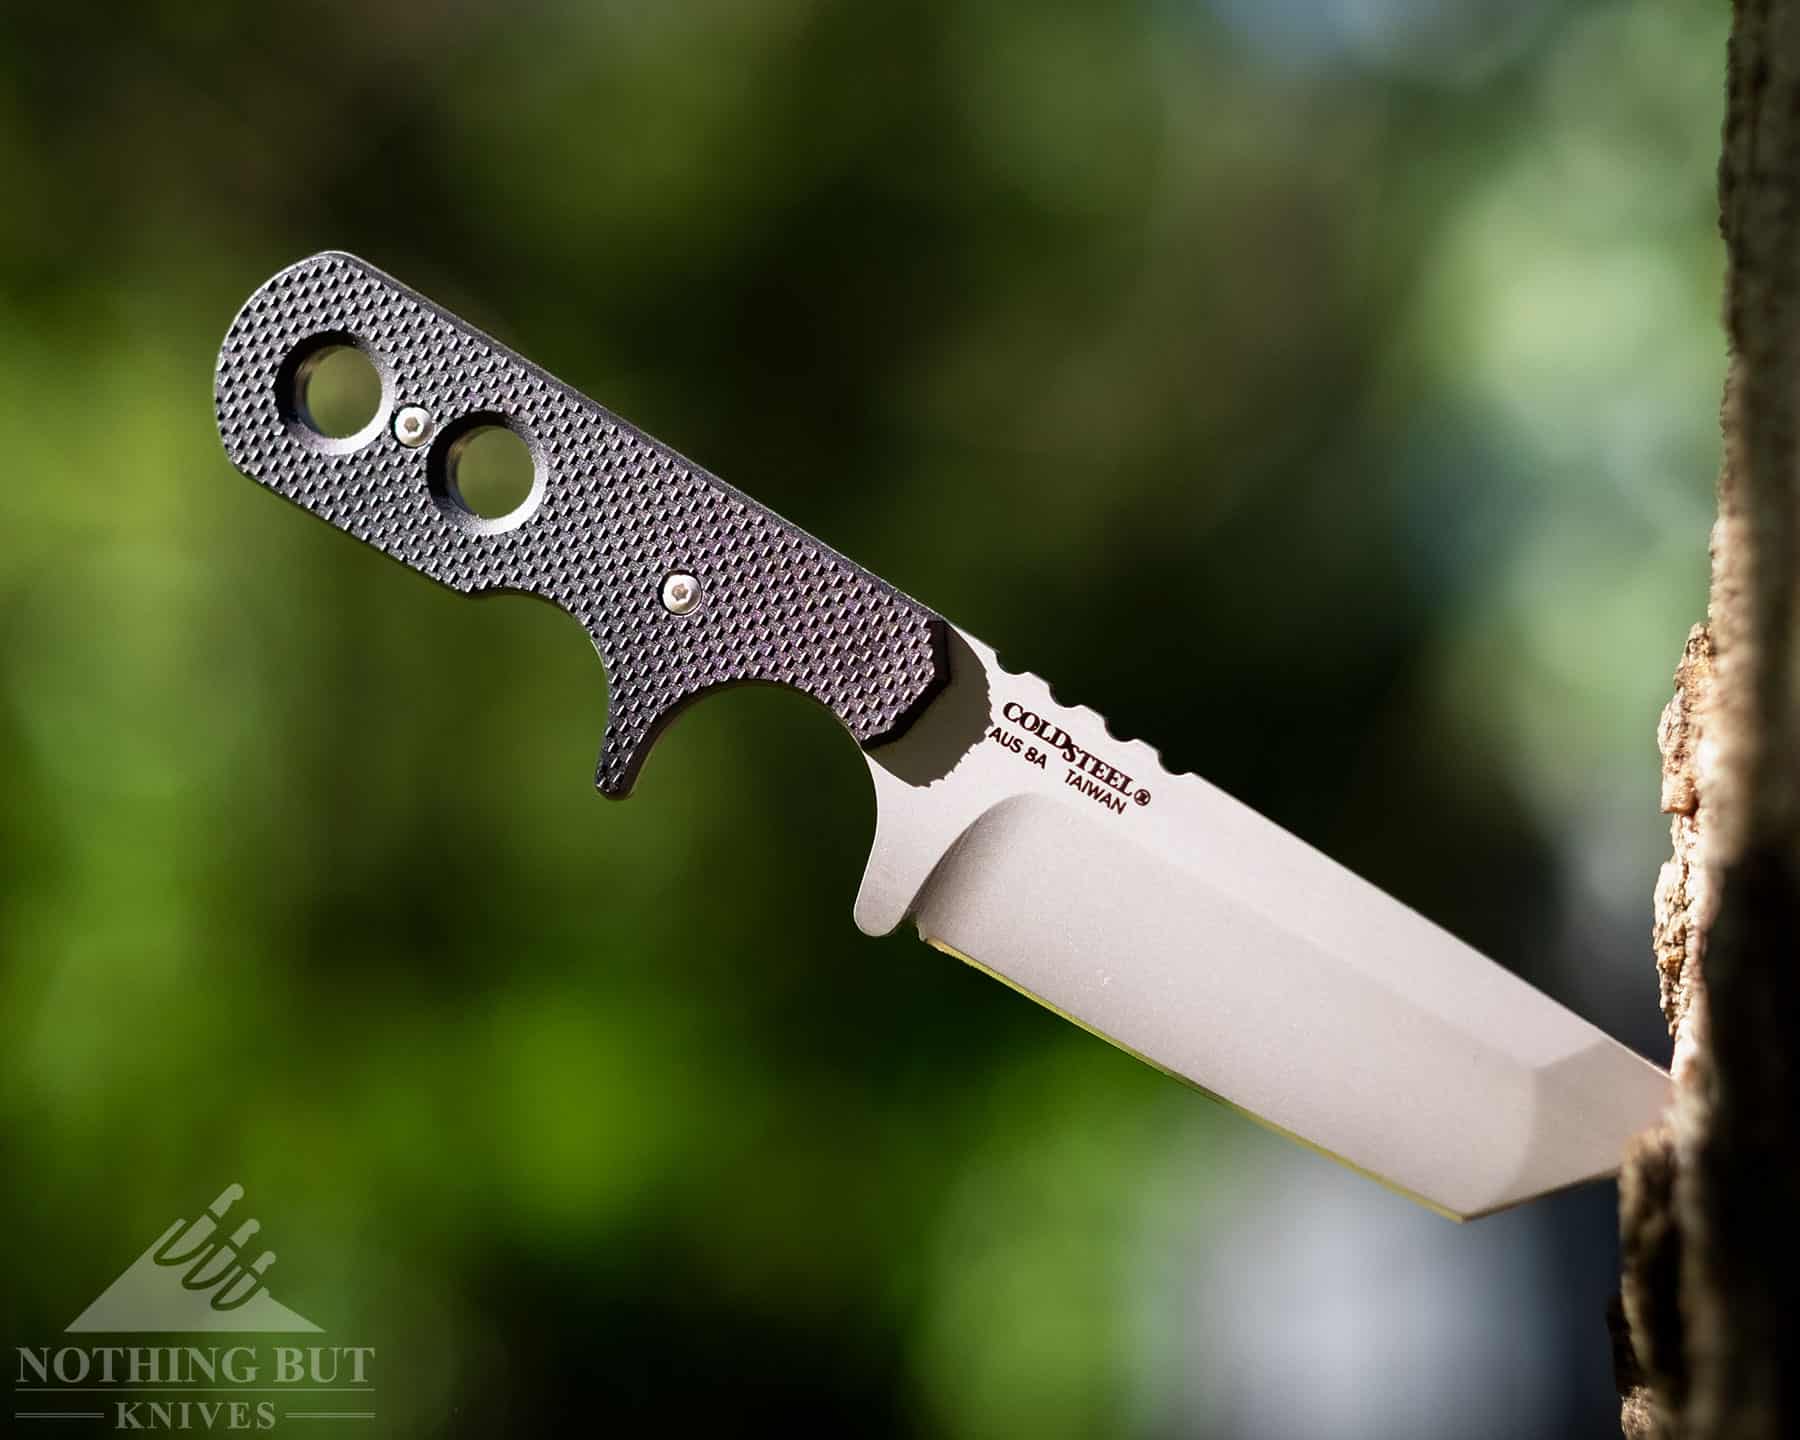 The Cold Steel Mini Tac is a good self defense neck knife, and it is fairly affordable.